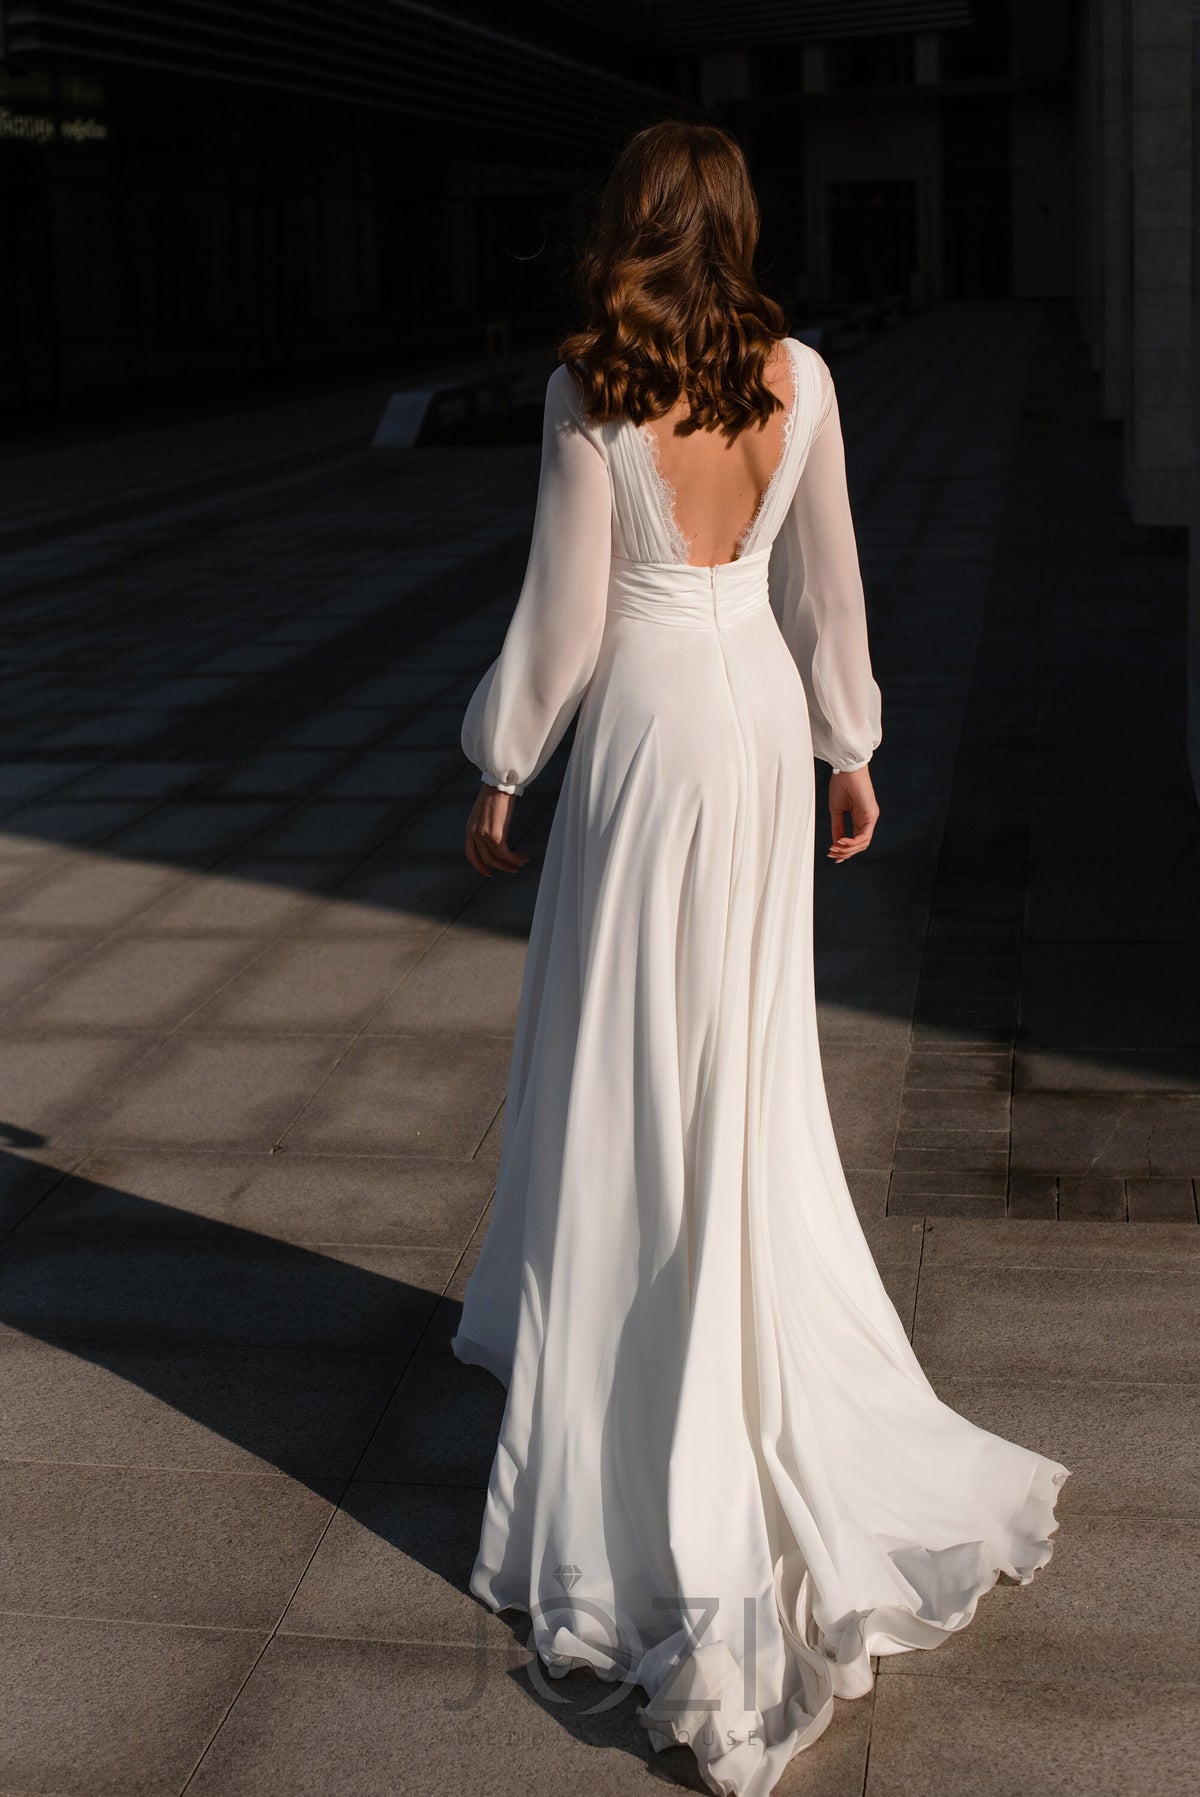 Simple Wedding Dress in Milky Chiffon Long Sleeves V-shaped Neckline Open Back Bridal Gown two Side Slits at the Front Light Weight Beach